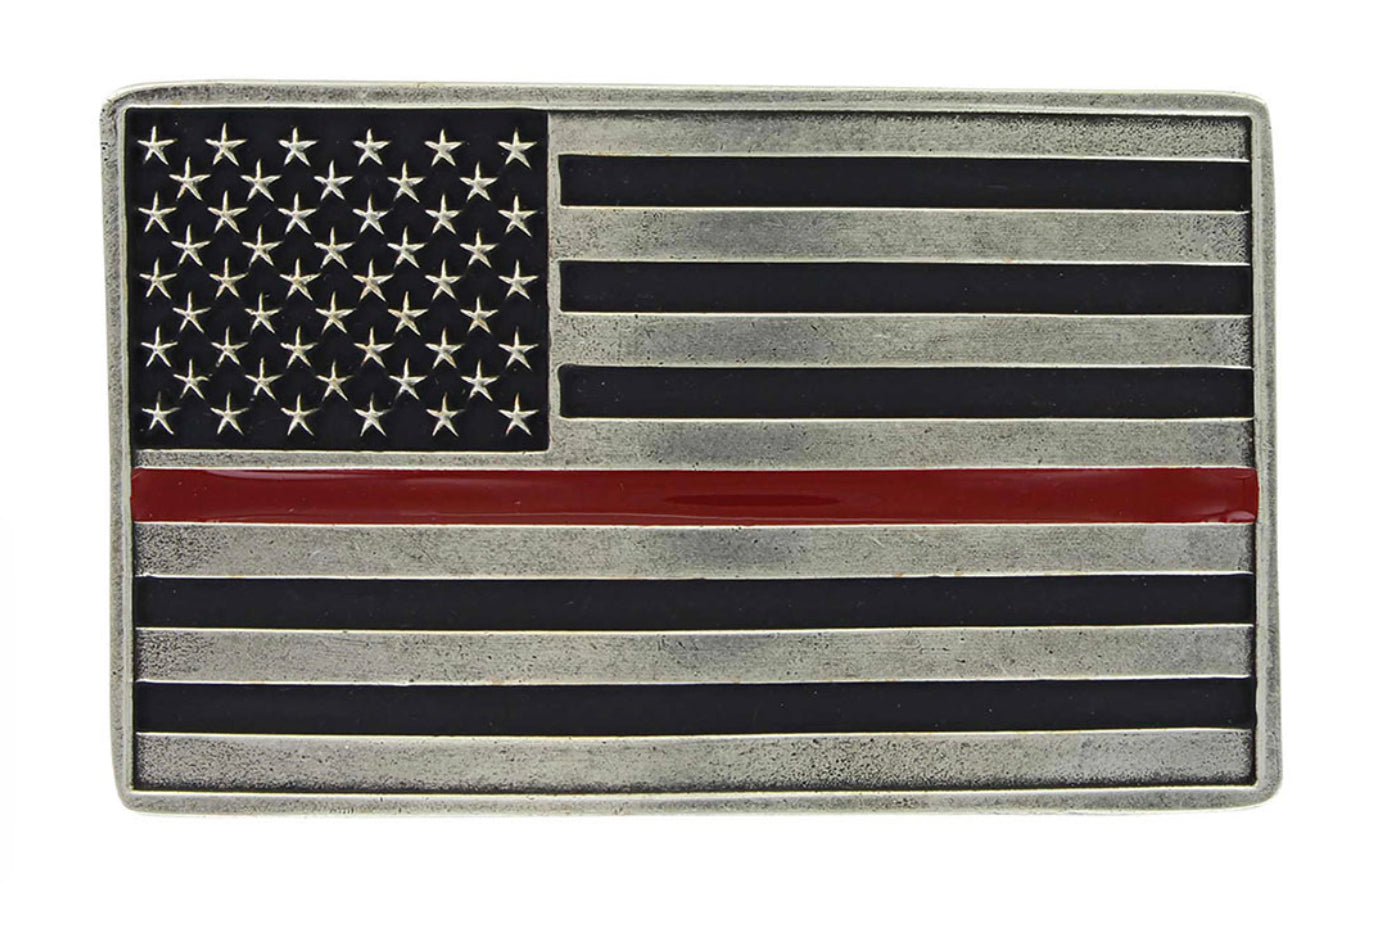 Stand Behind the Red Line Belt Buckle